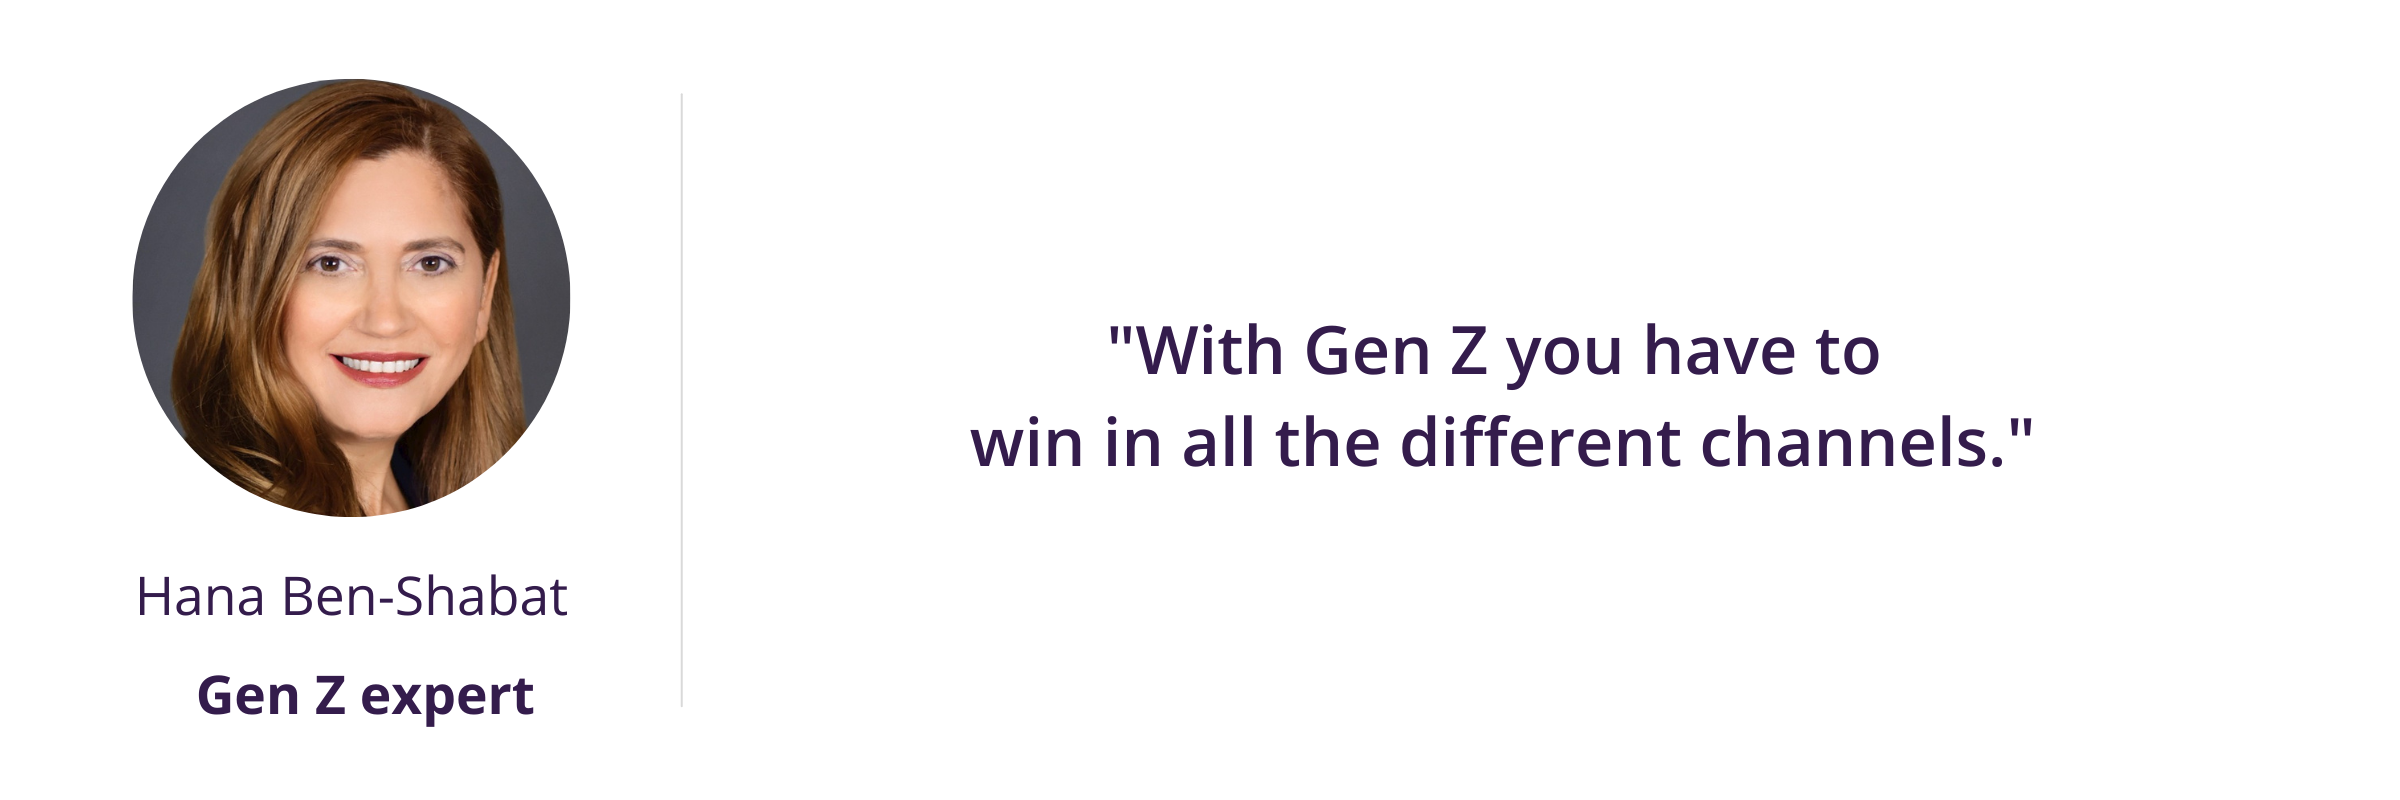 With Gen Z you have to win in all the different channels.